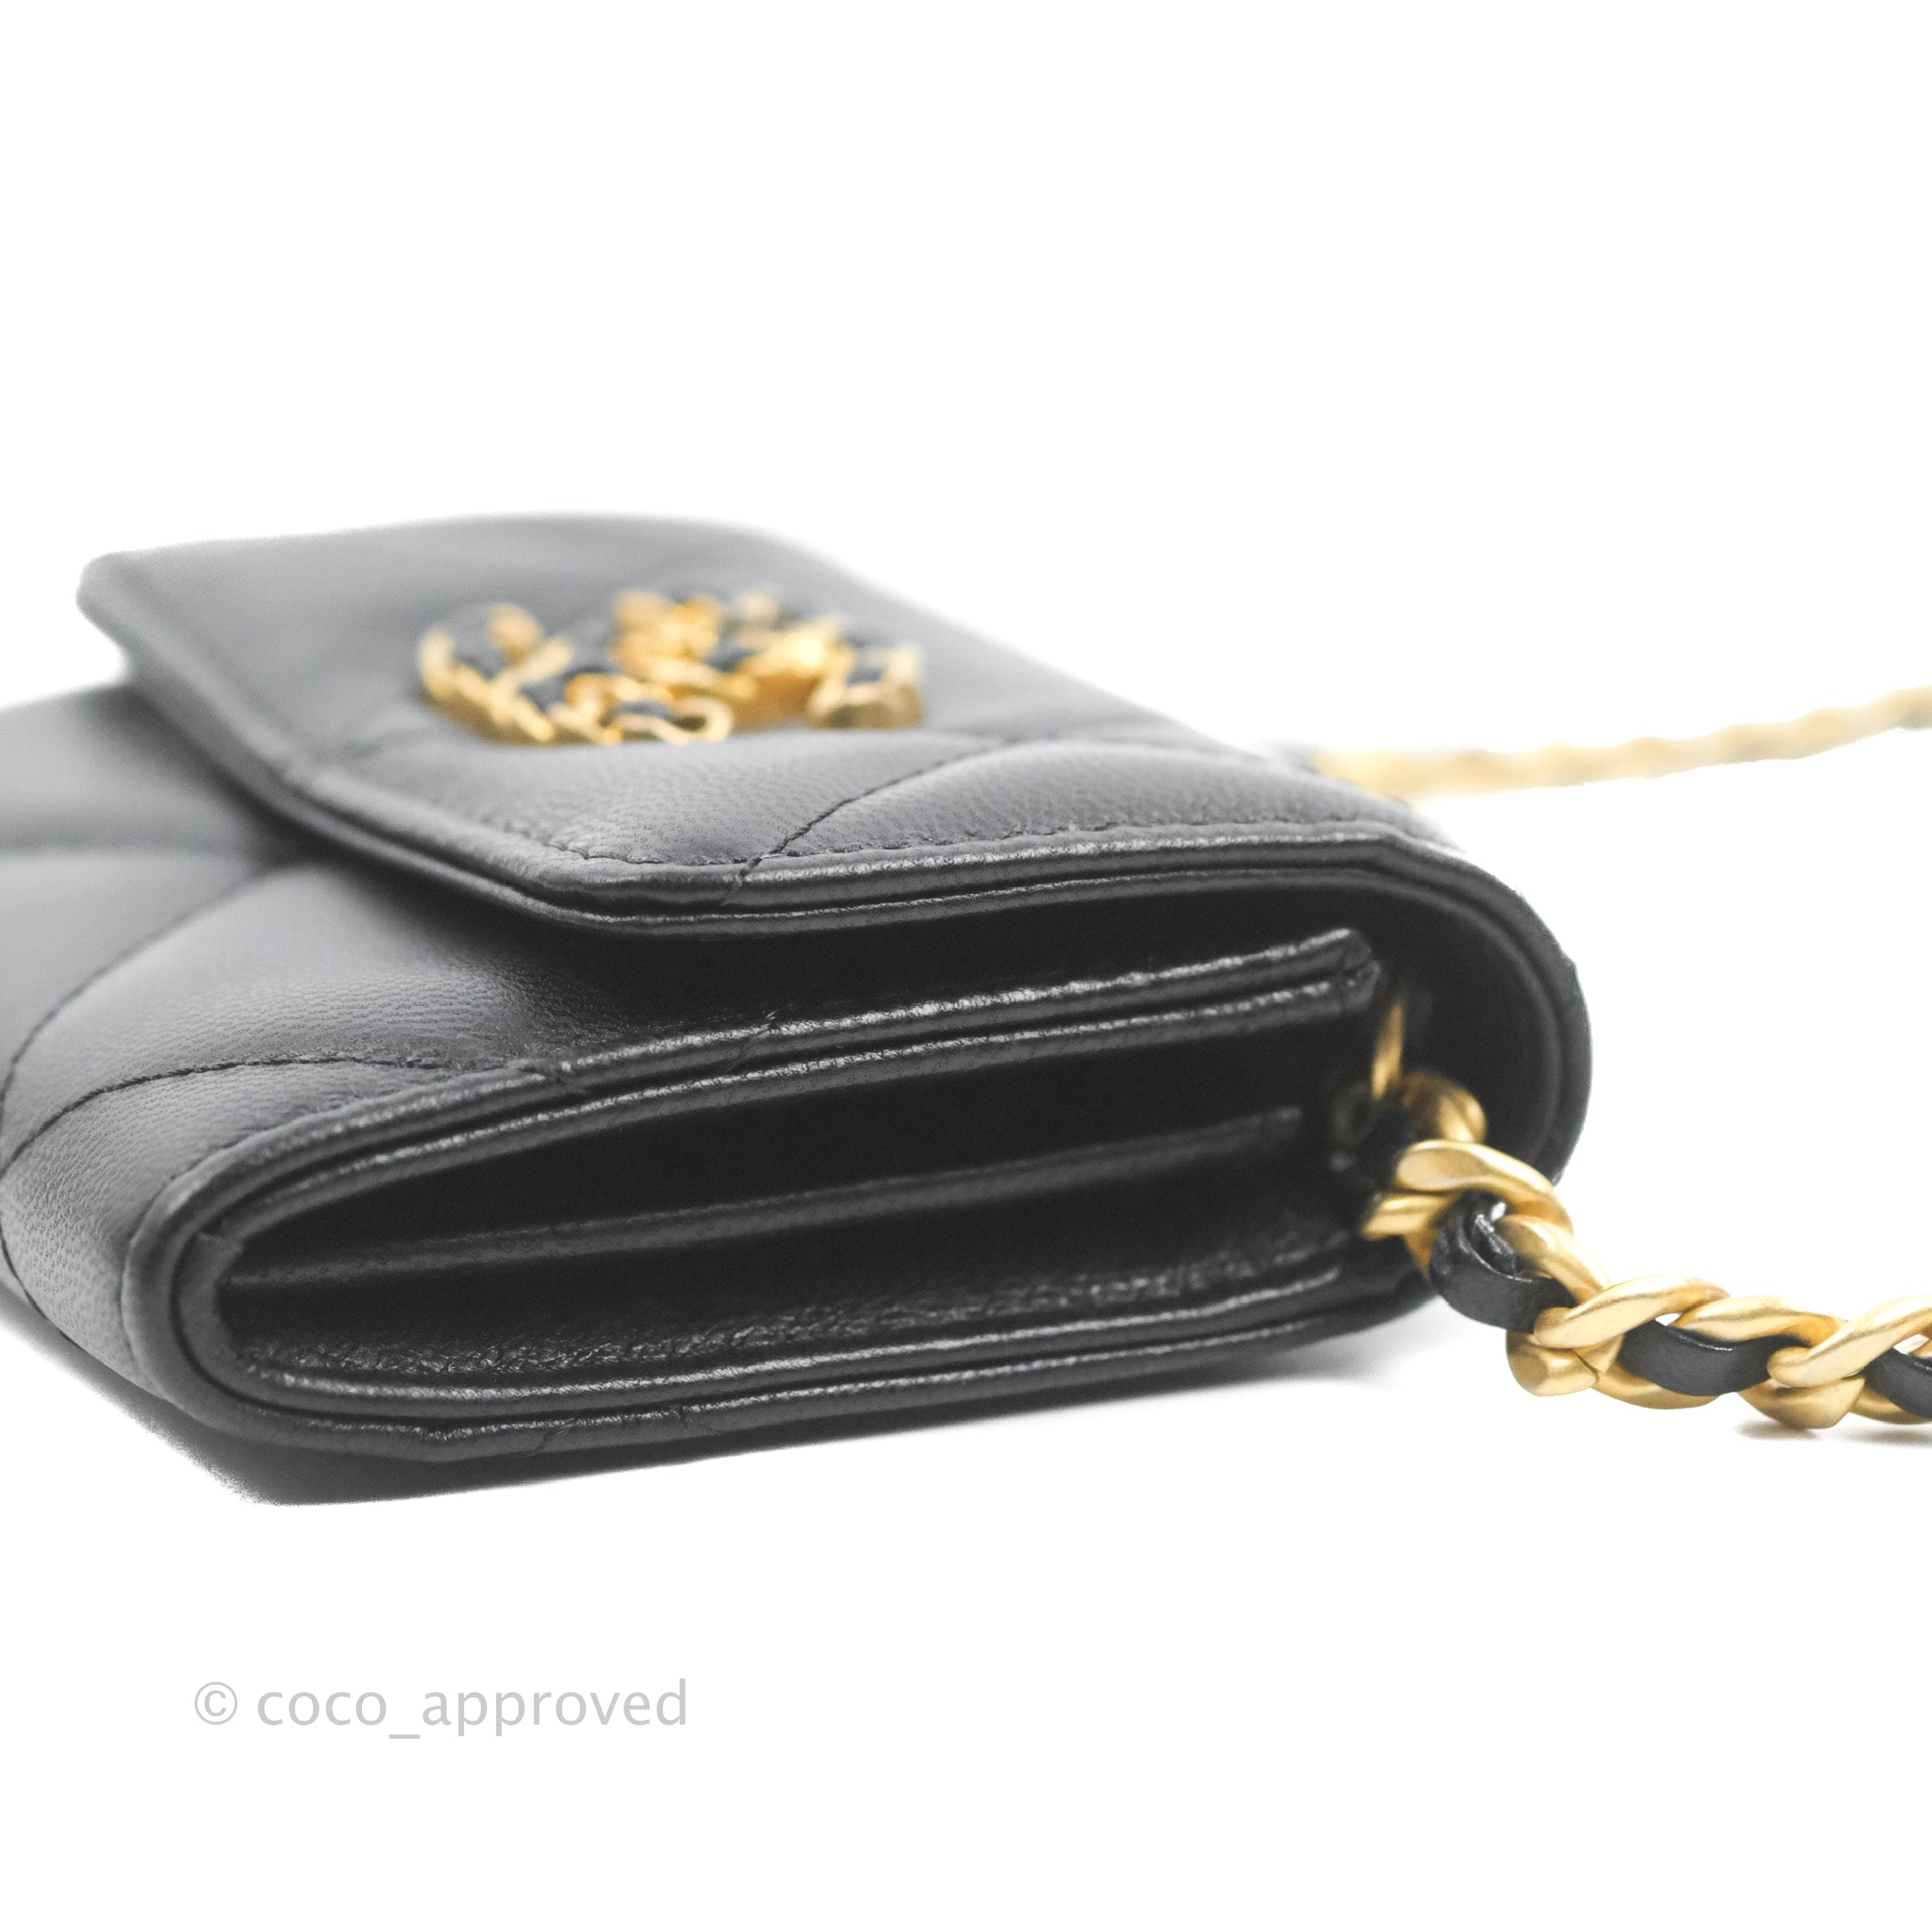 Chanel Chanel 19 Coin Purse Flap